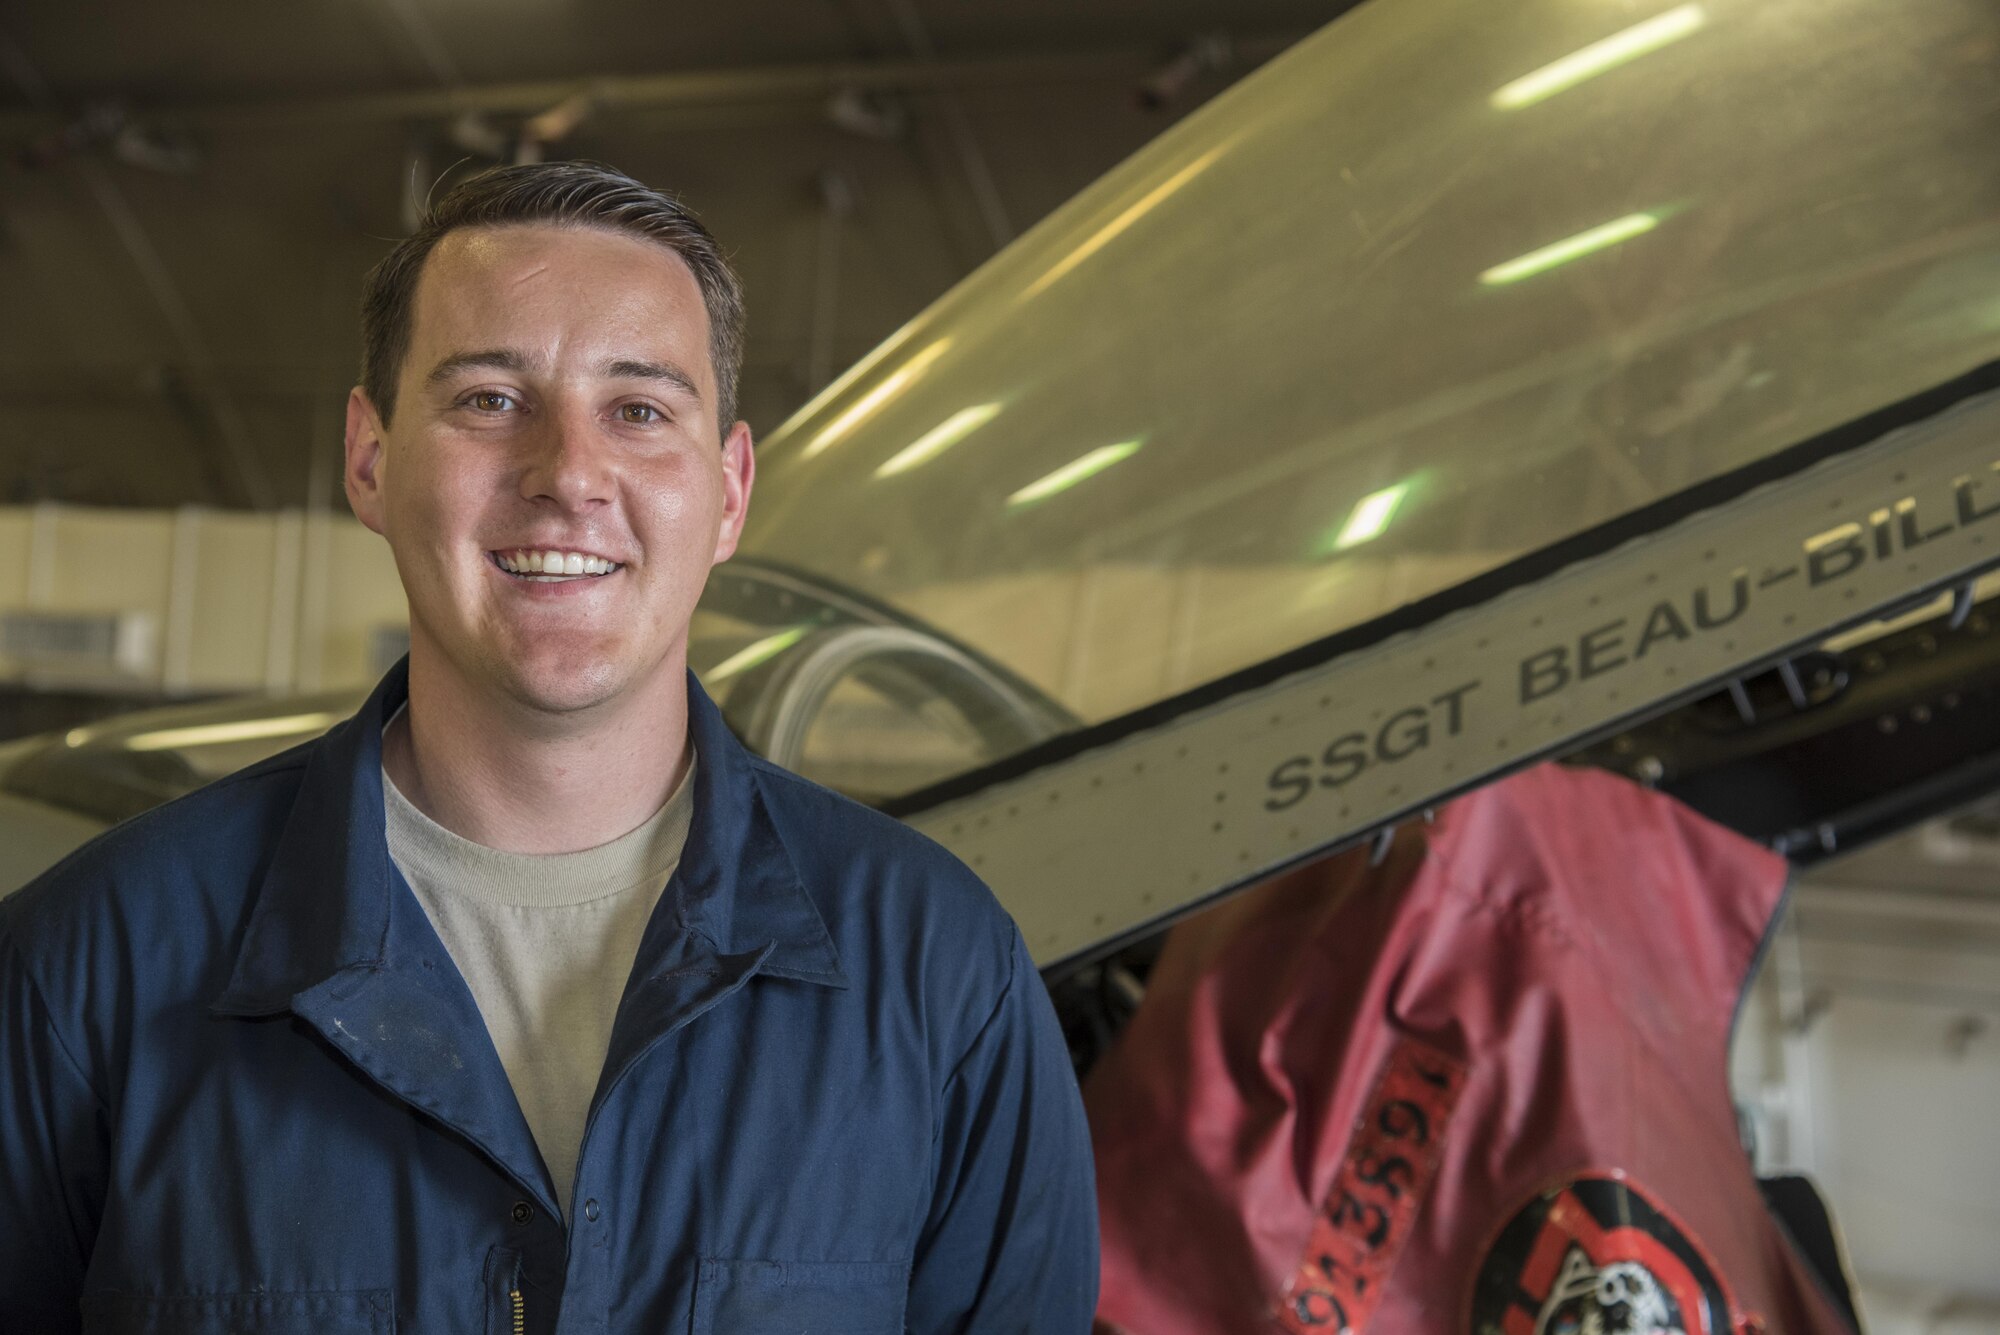 Staff Sgt. Beau Blackburn, a dedicated crew chief with the 35th Aircraft Maintenance Squadron, stands next to an F-16 Fighting Falcon canopy at Misawa Air Base, Japan, June 16, 2016. When a crew chief is assigned to an aircraft, their name is symbolically posted to the side of the bubble canopy. This tradition signifies the responsibility each crew chief has to keep their aircraft in perfect working order, ensuring its reliability. (U.S. Air Force photo/Airman 1st Class Jordyn Fetter)